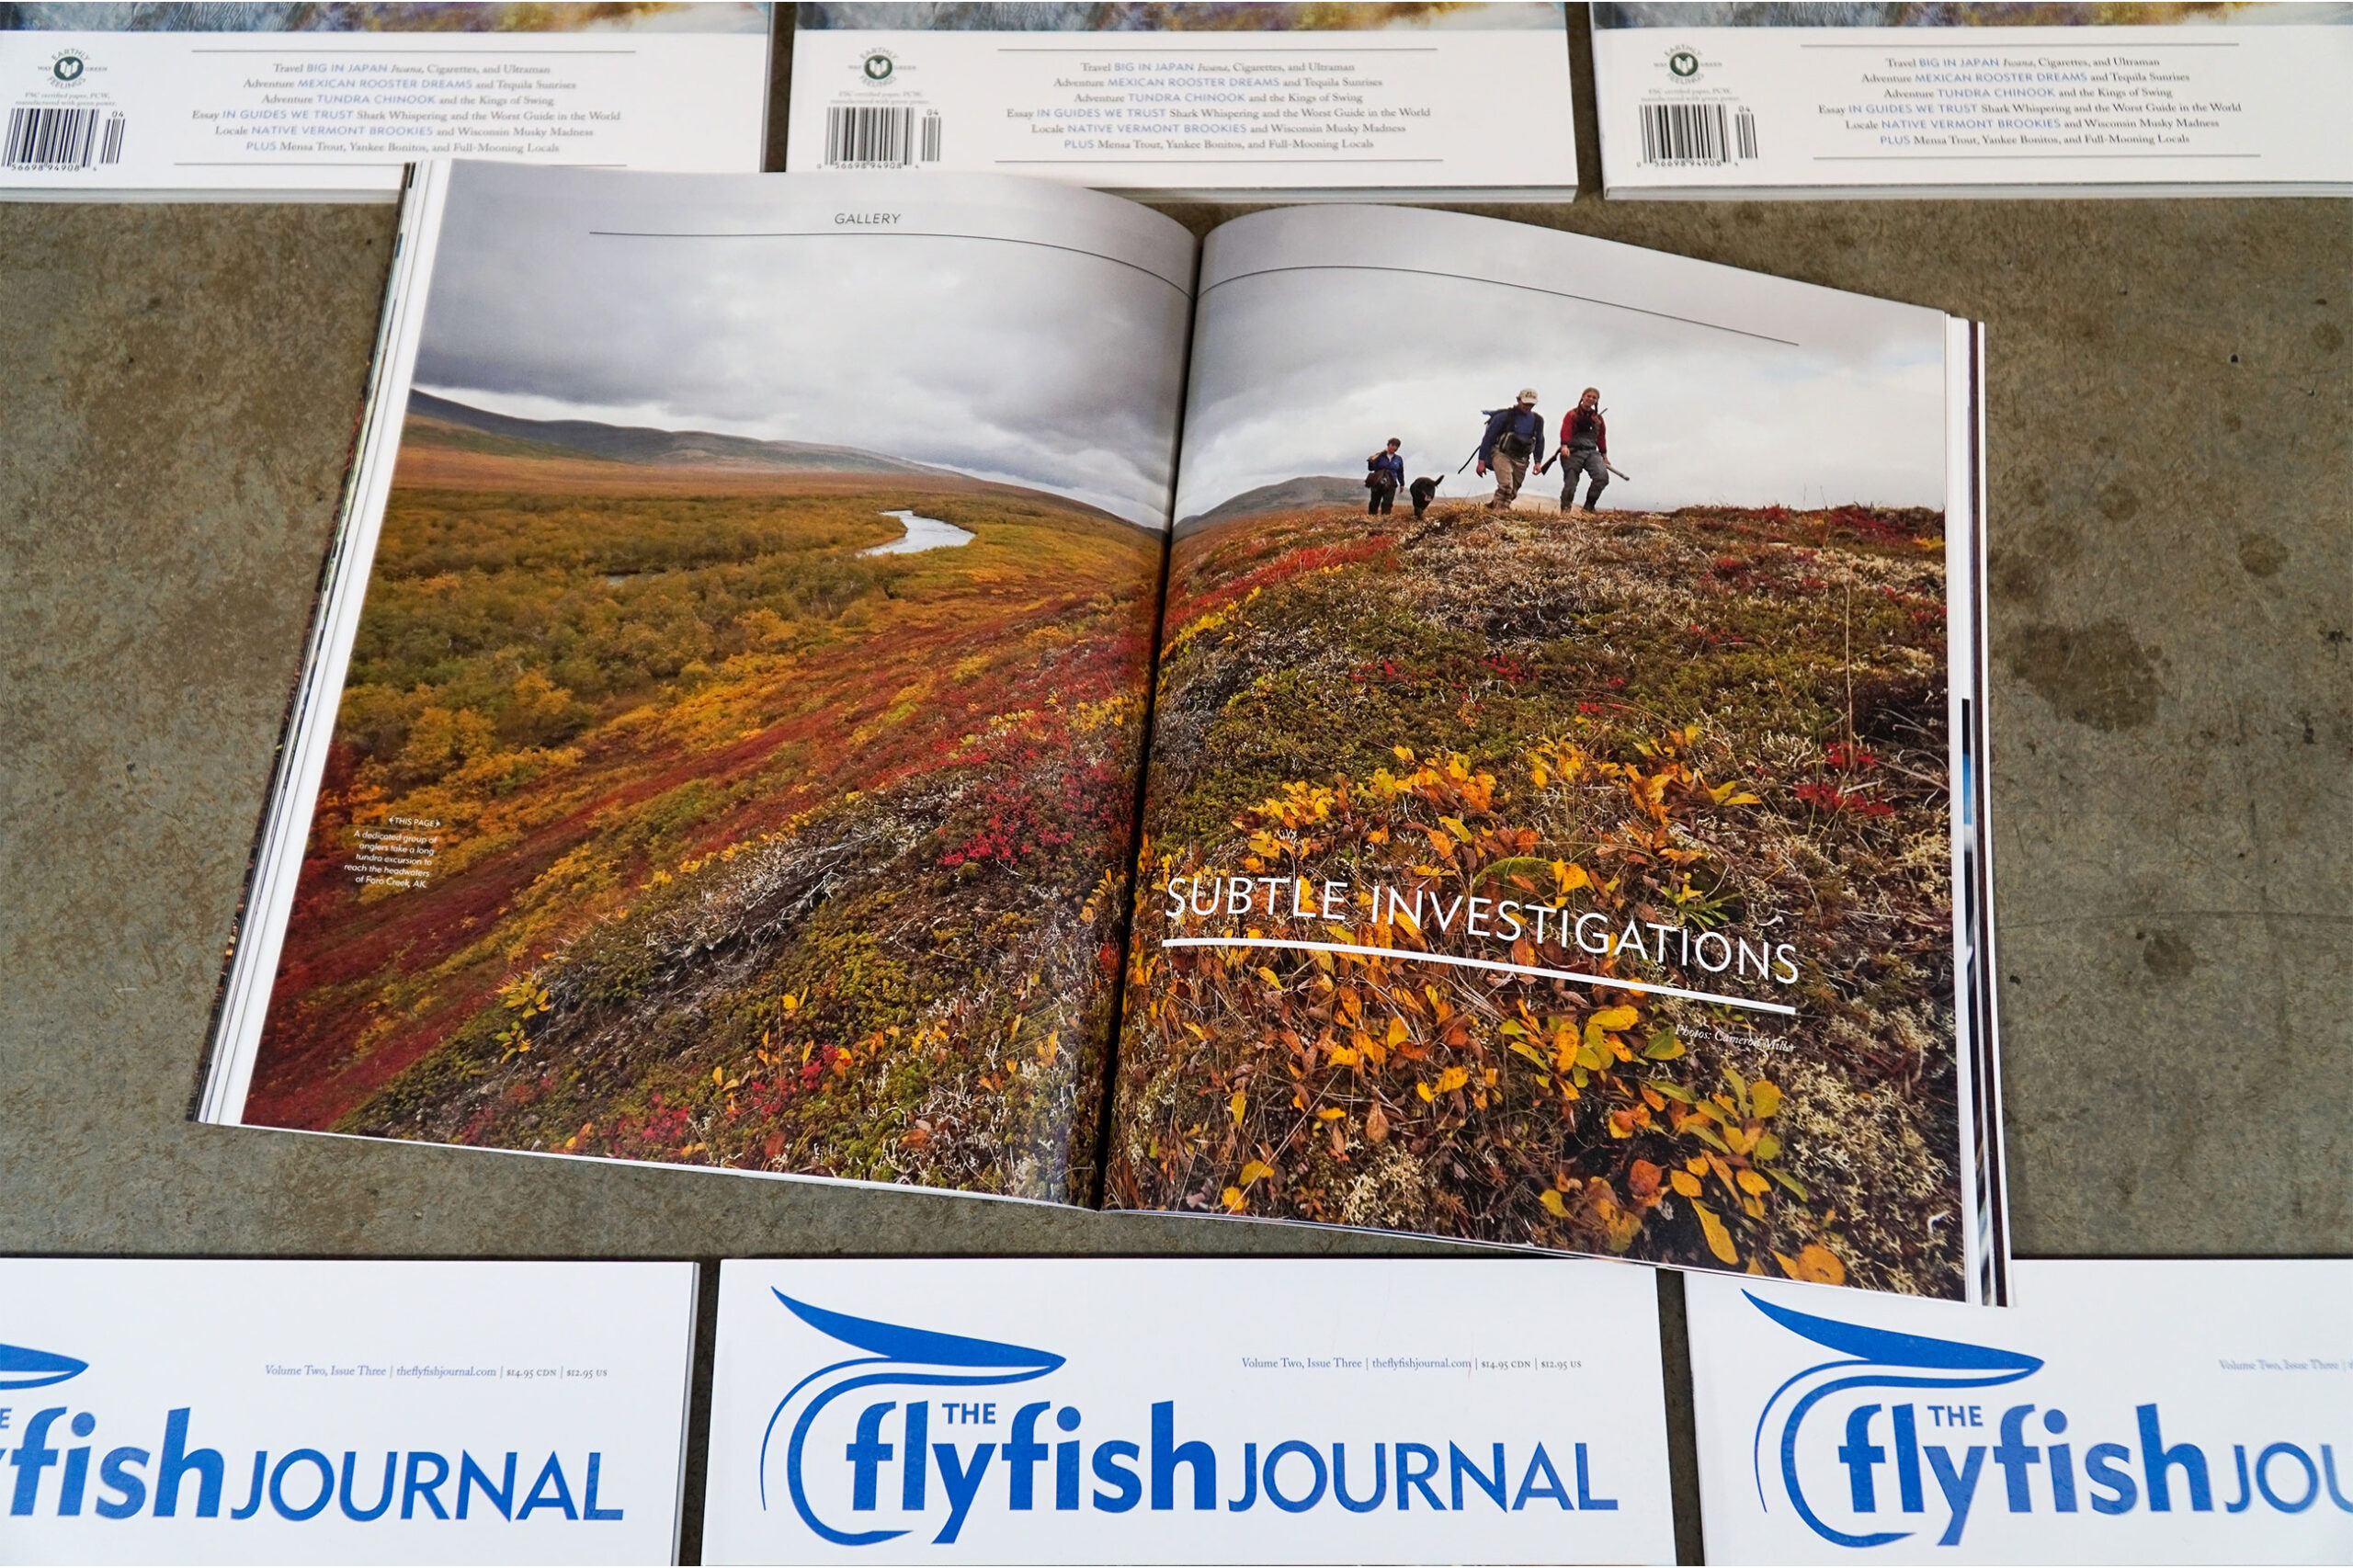 The Flyfish Journal Volume 2 Issue 3 Feature Subtle Investigations